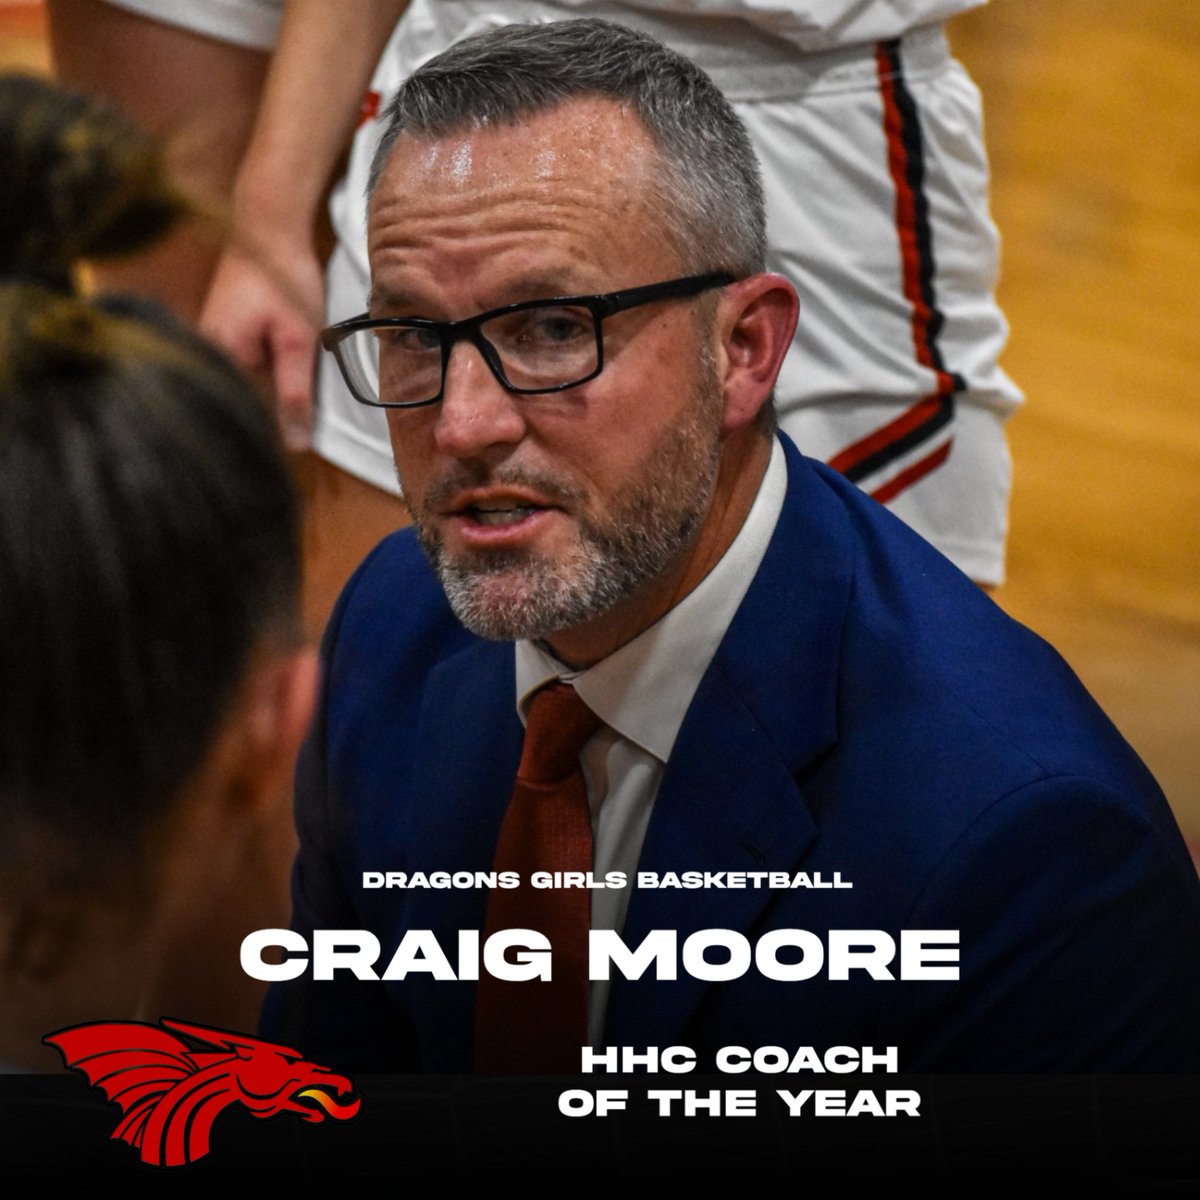 Congratulations to girls basketball coach Craig Moore, named the HHC Coach of the Year after leading the Dragons to their first conference title in five seasons. 📸 Aaron Smith